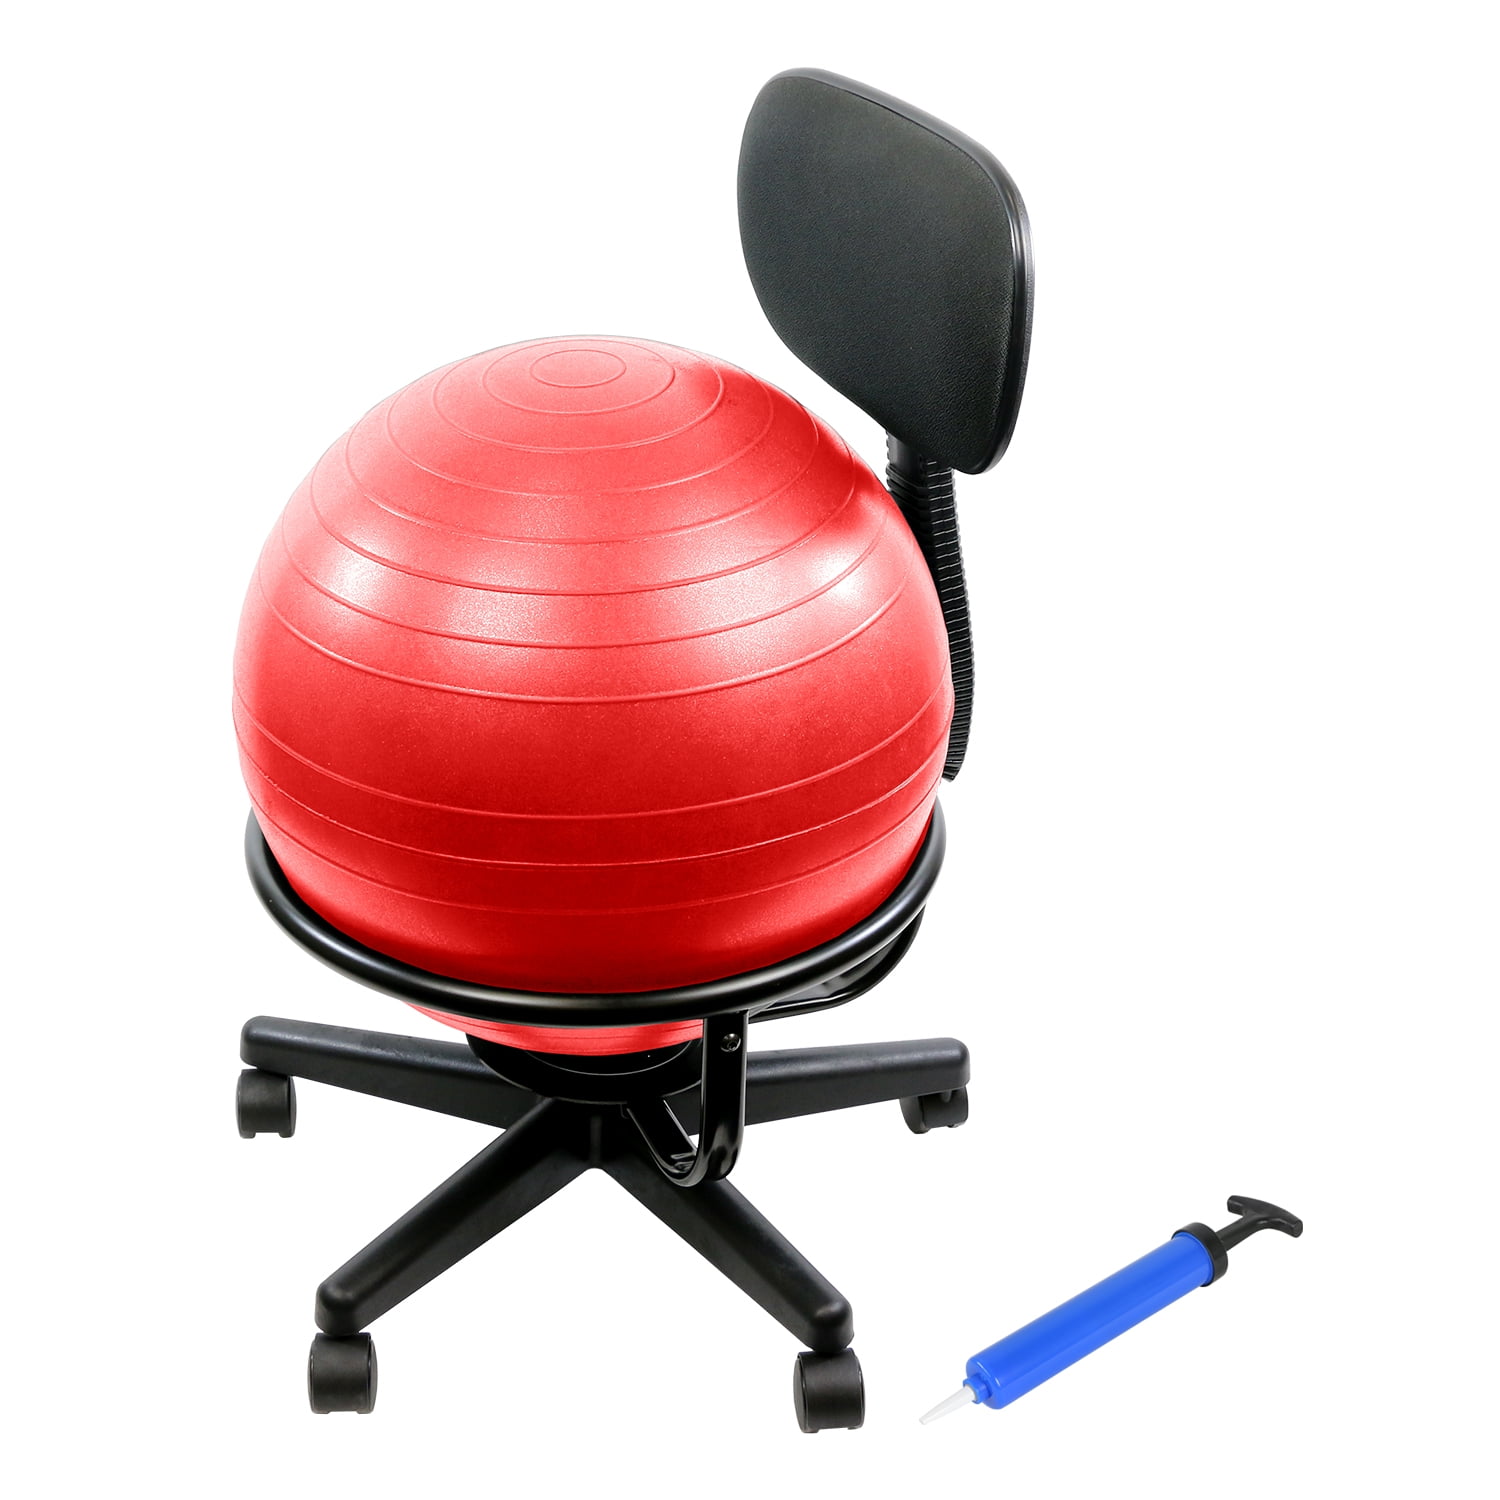 Cando Metal Ball Chair Inflatable Ergonomic Active Seating Exercise